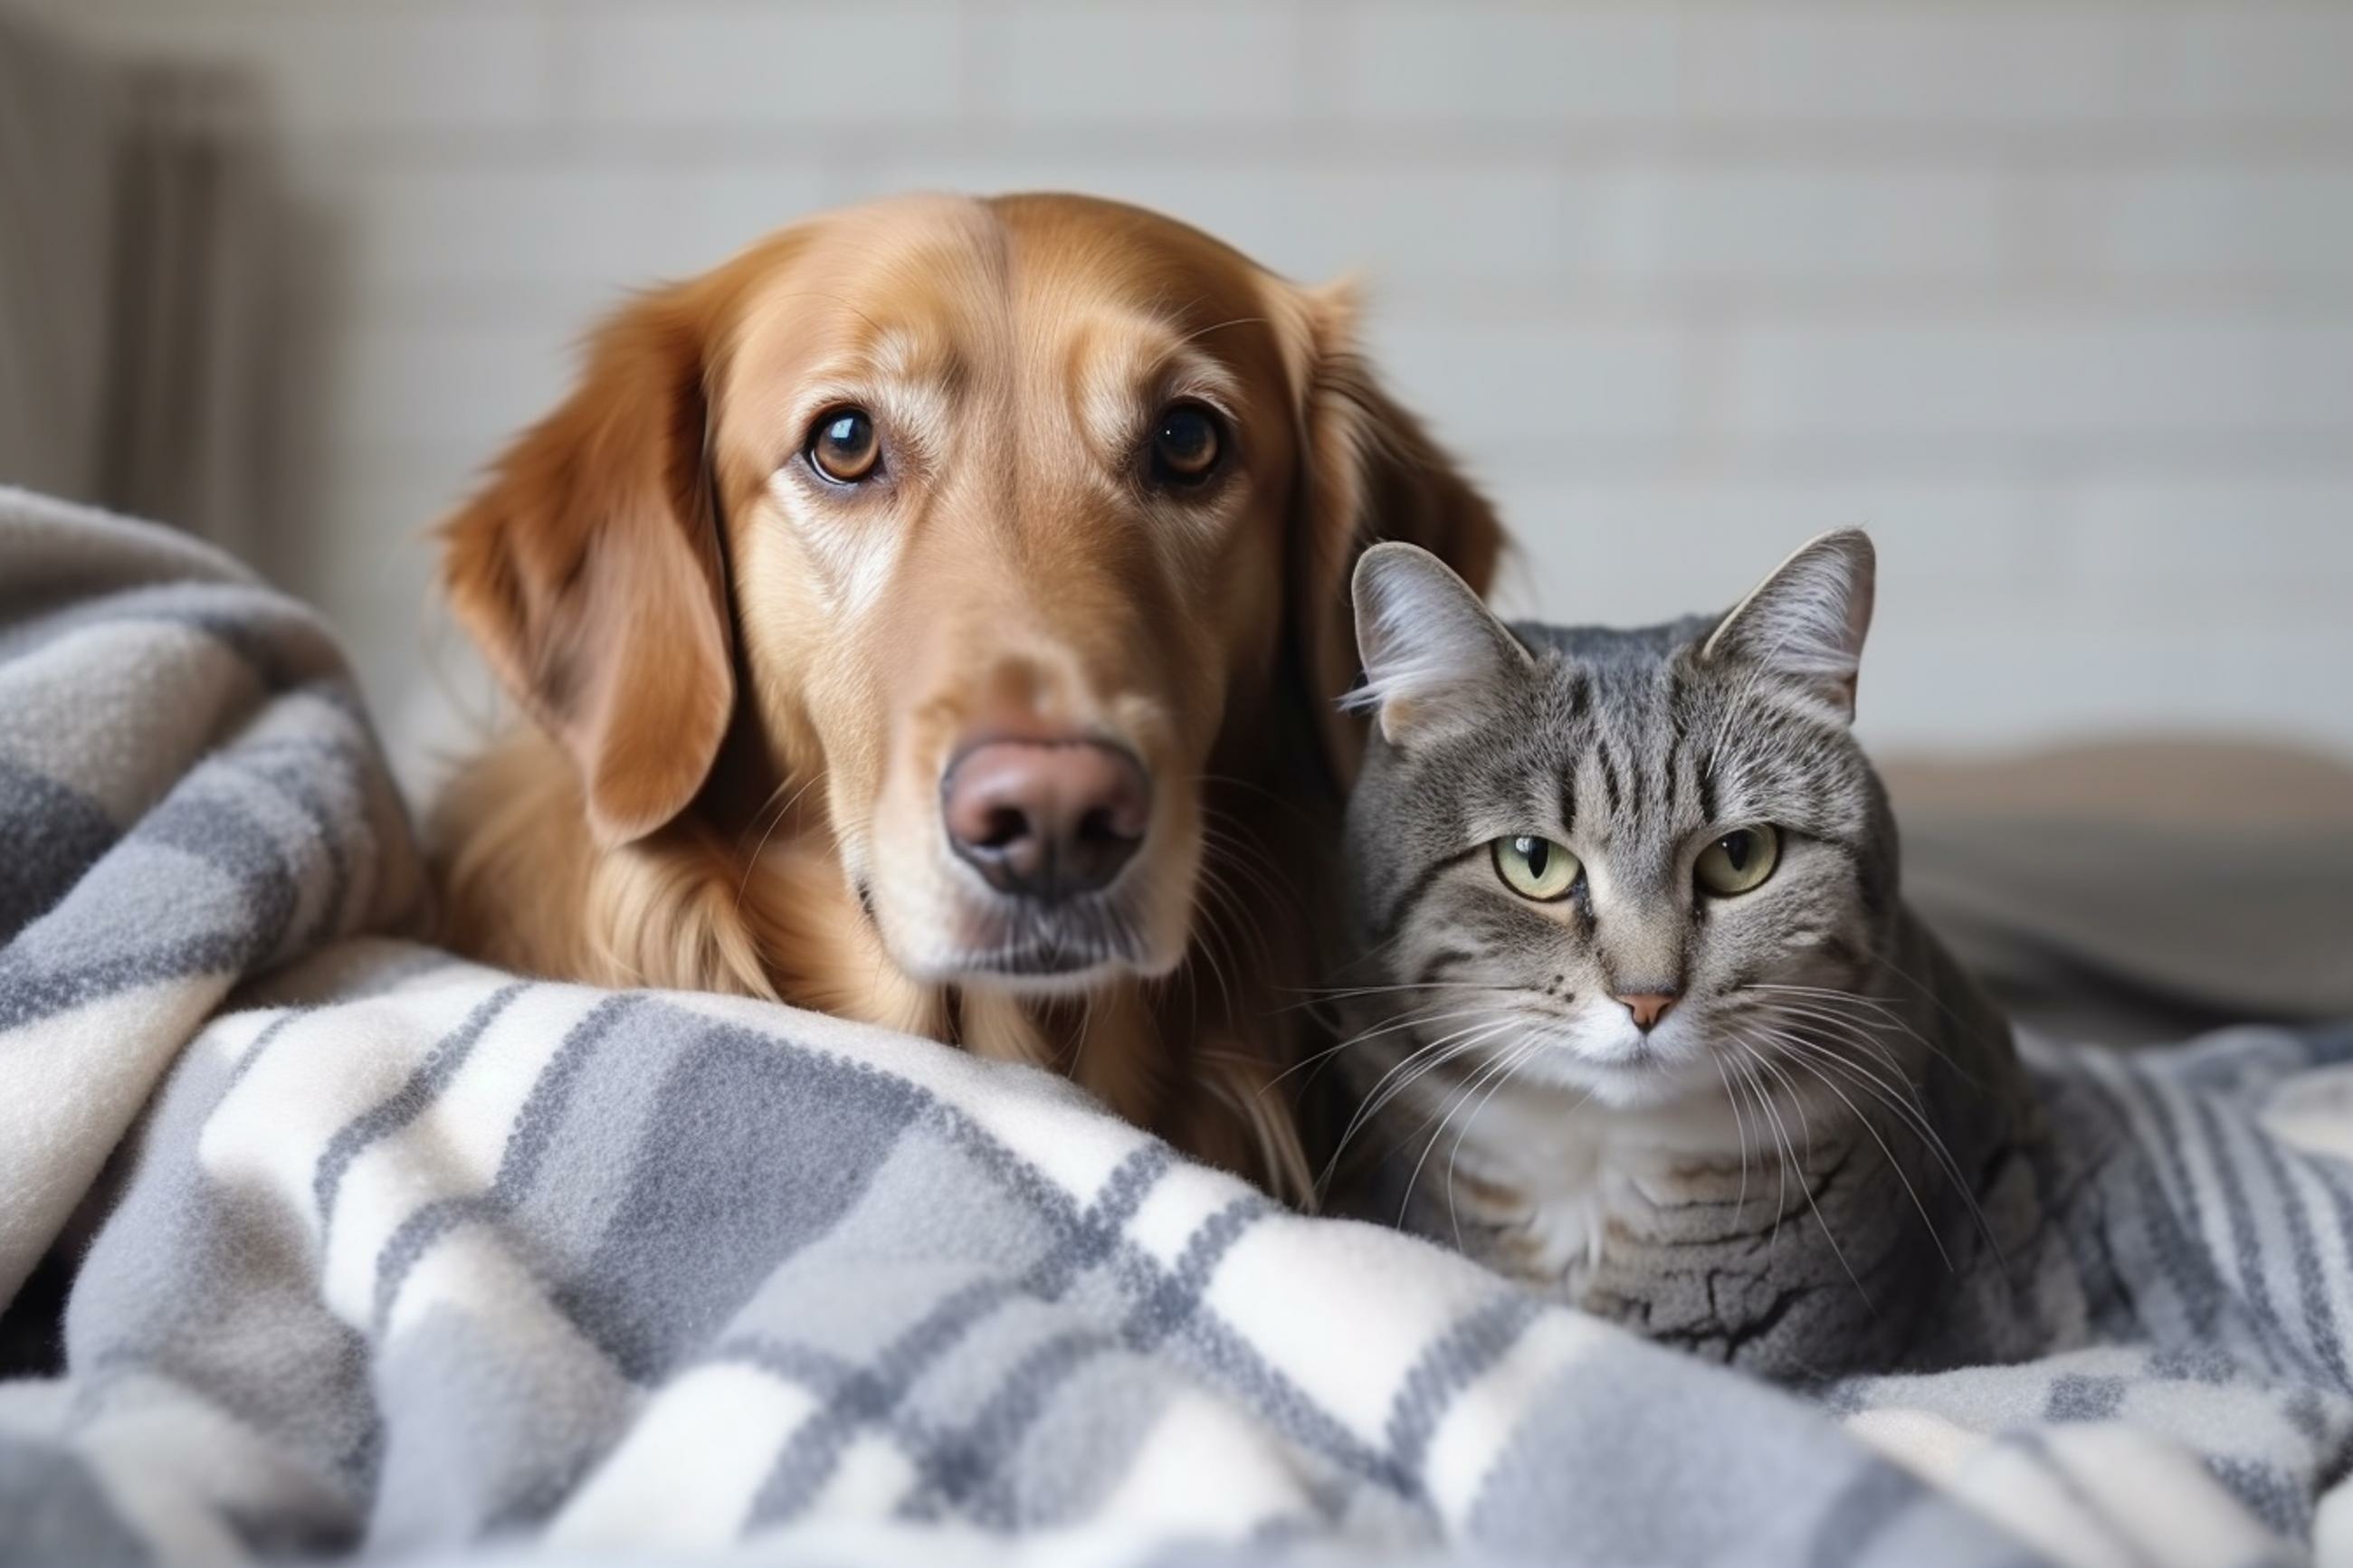 A dog and a cat feel sick